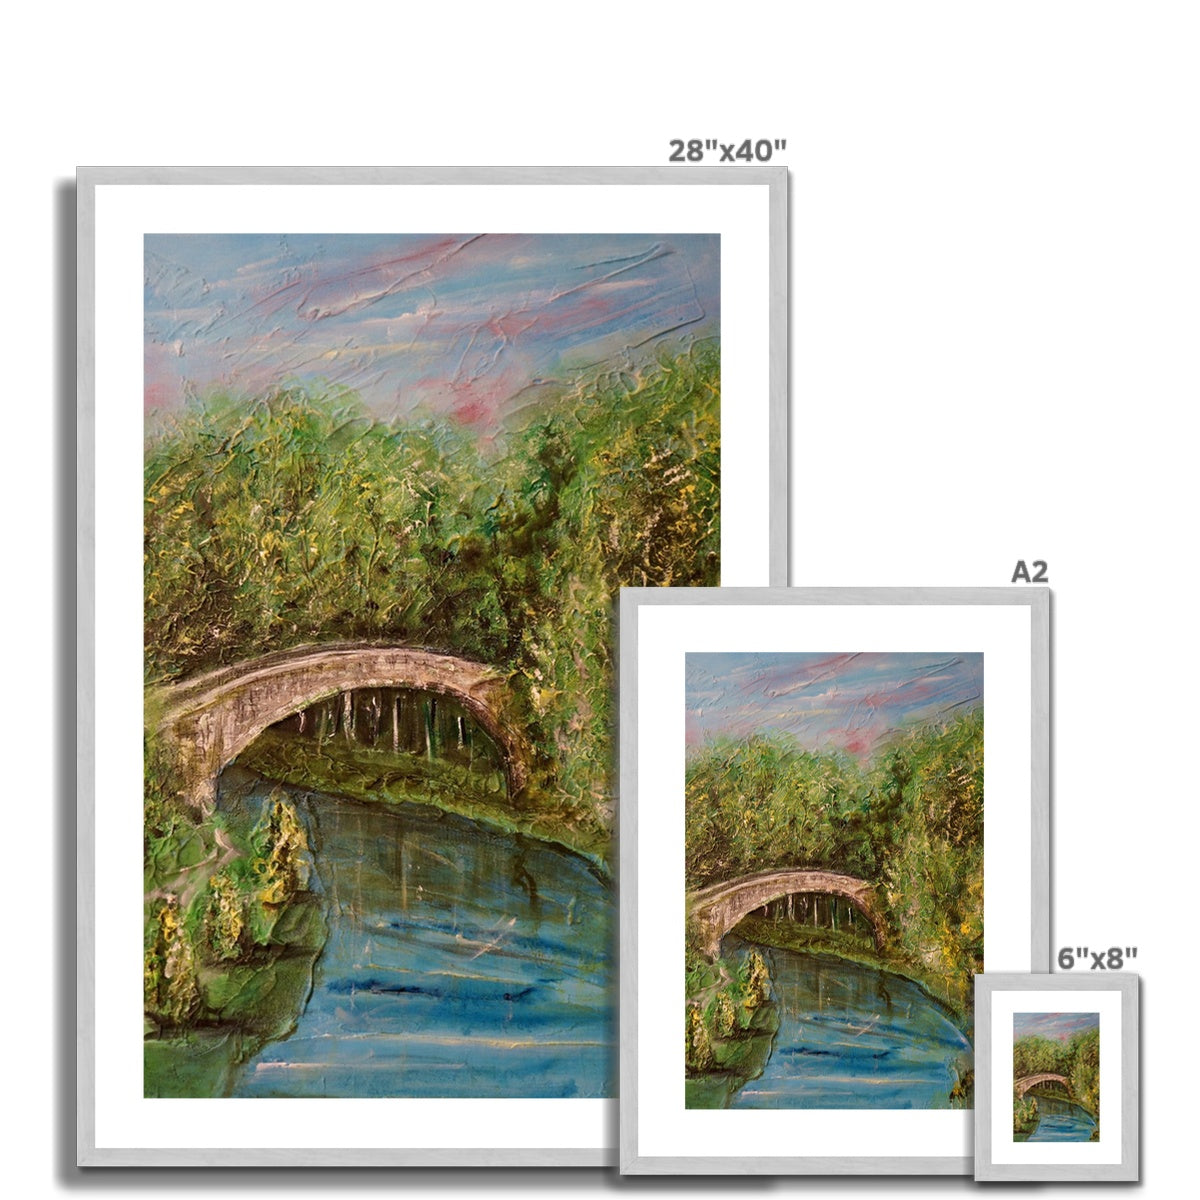 The Brig O Doon Painting | Antique Framed & Mounted Prints From Scotland-Antique Framed & Mounted Prints-Historic & Iconic Scotland Art Gallery-Paintings, Prints, Homeware, Art Gifts From Scotland By Scottish Artist Kevin Hunter